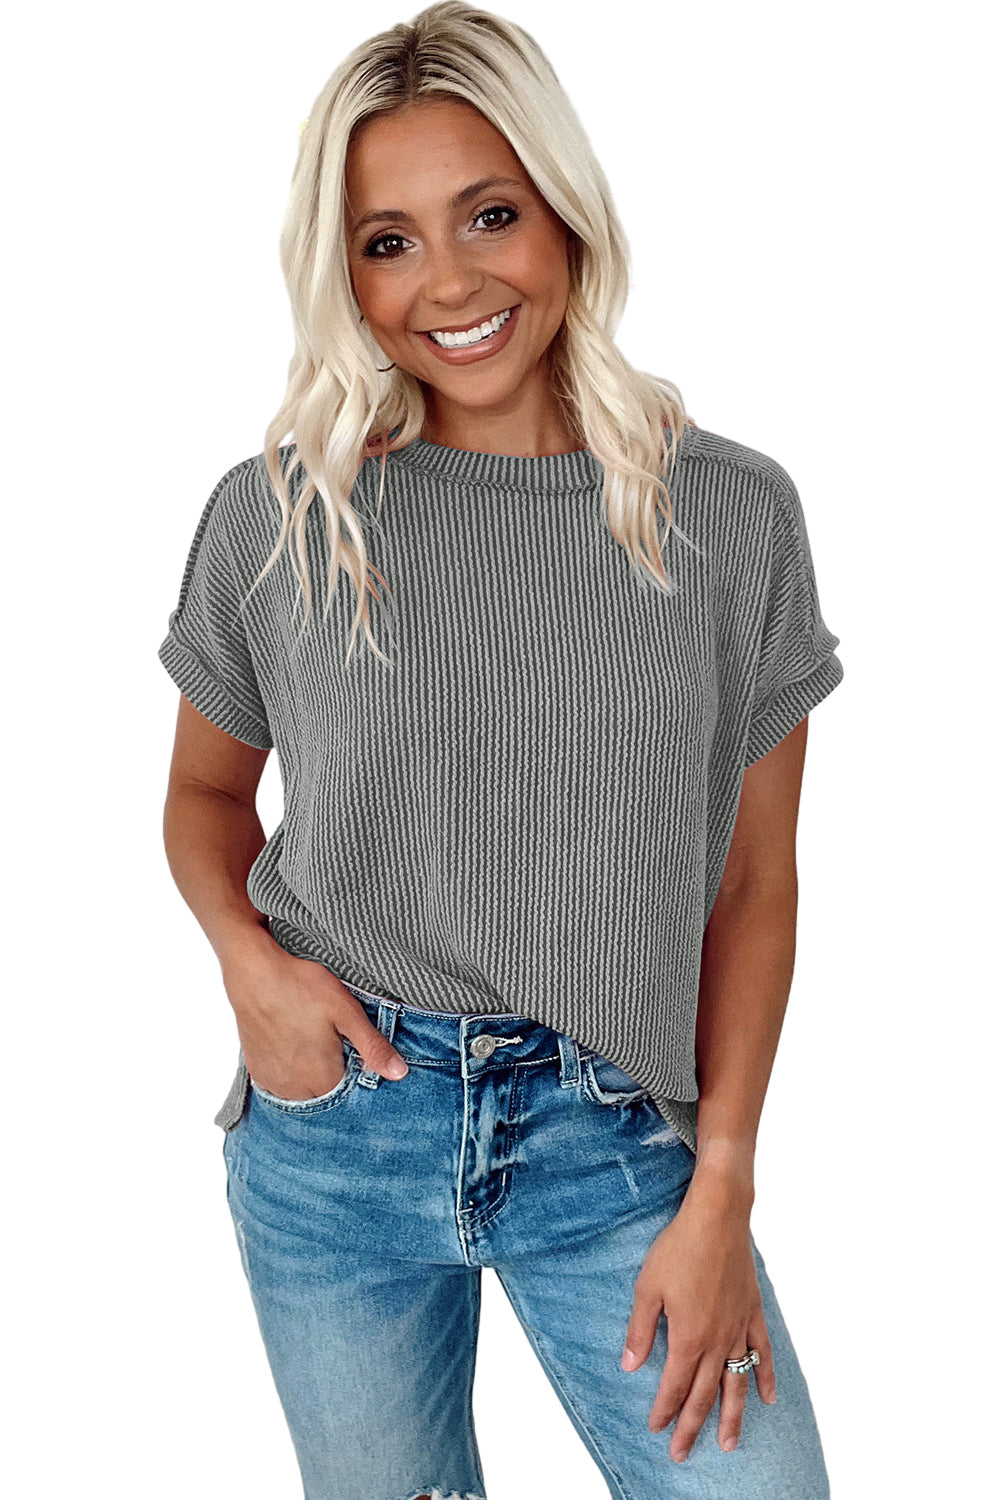 GREY TEXTURED EXPOSED STITCH TOP